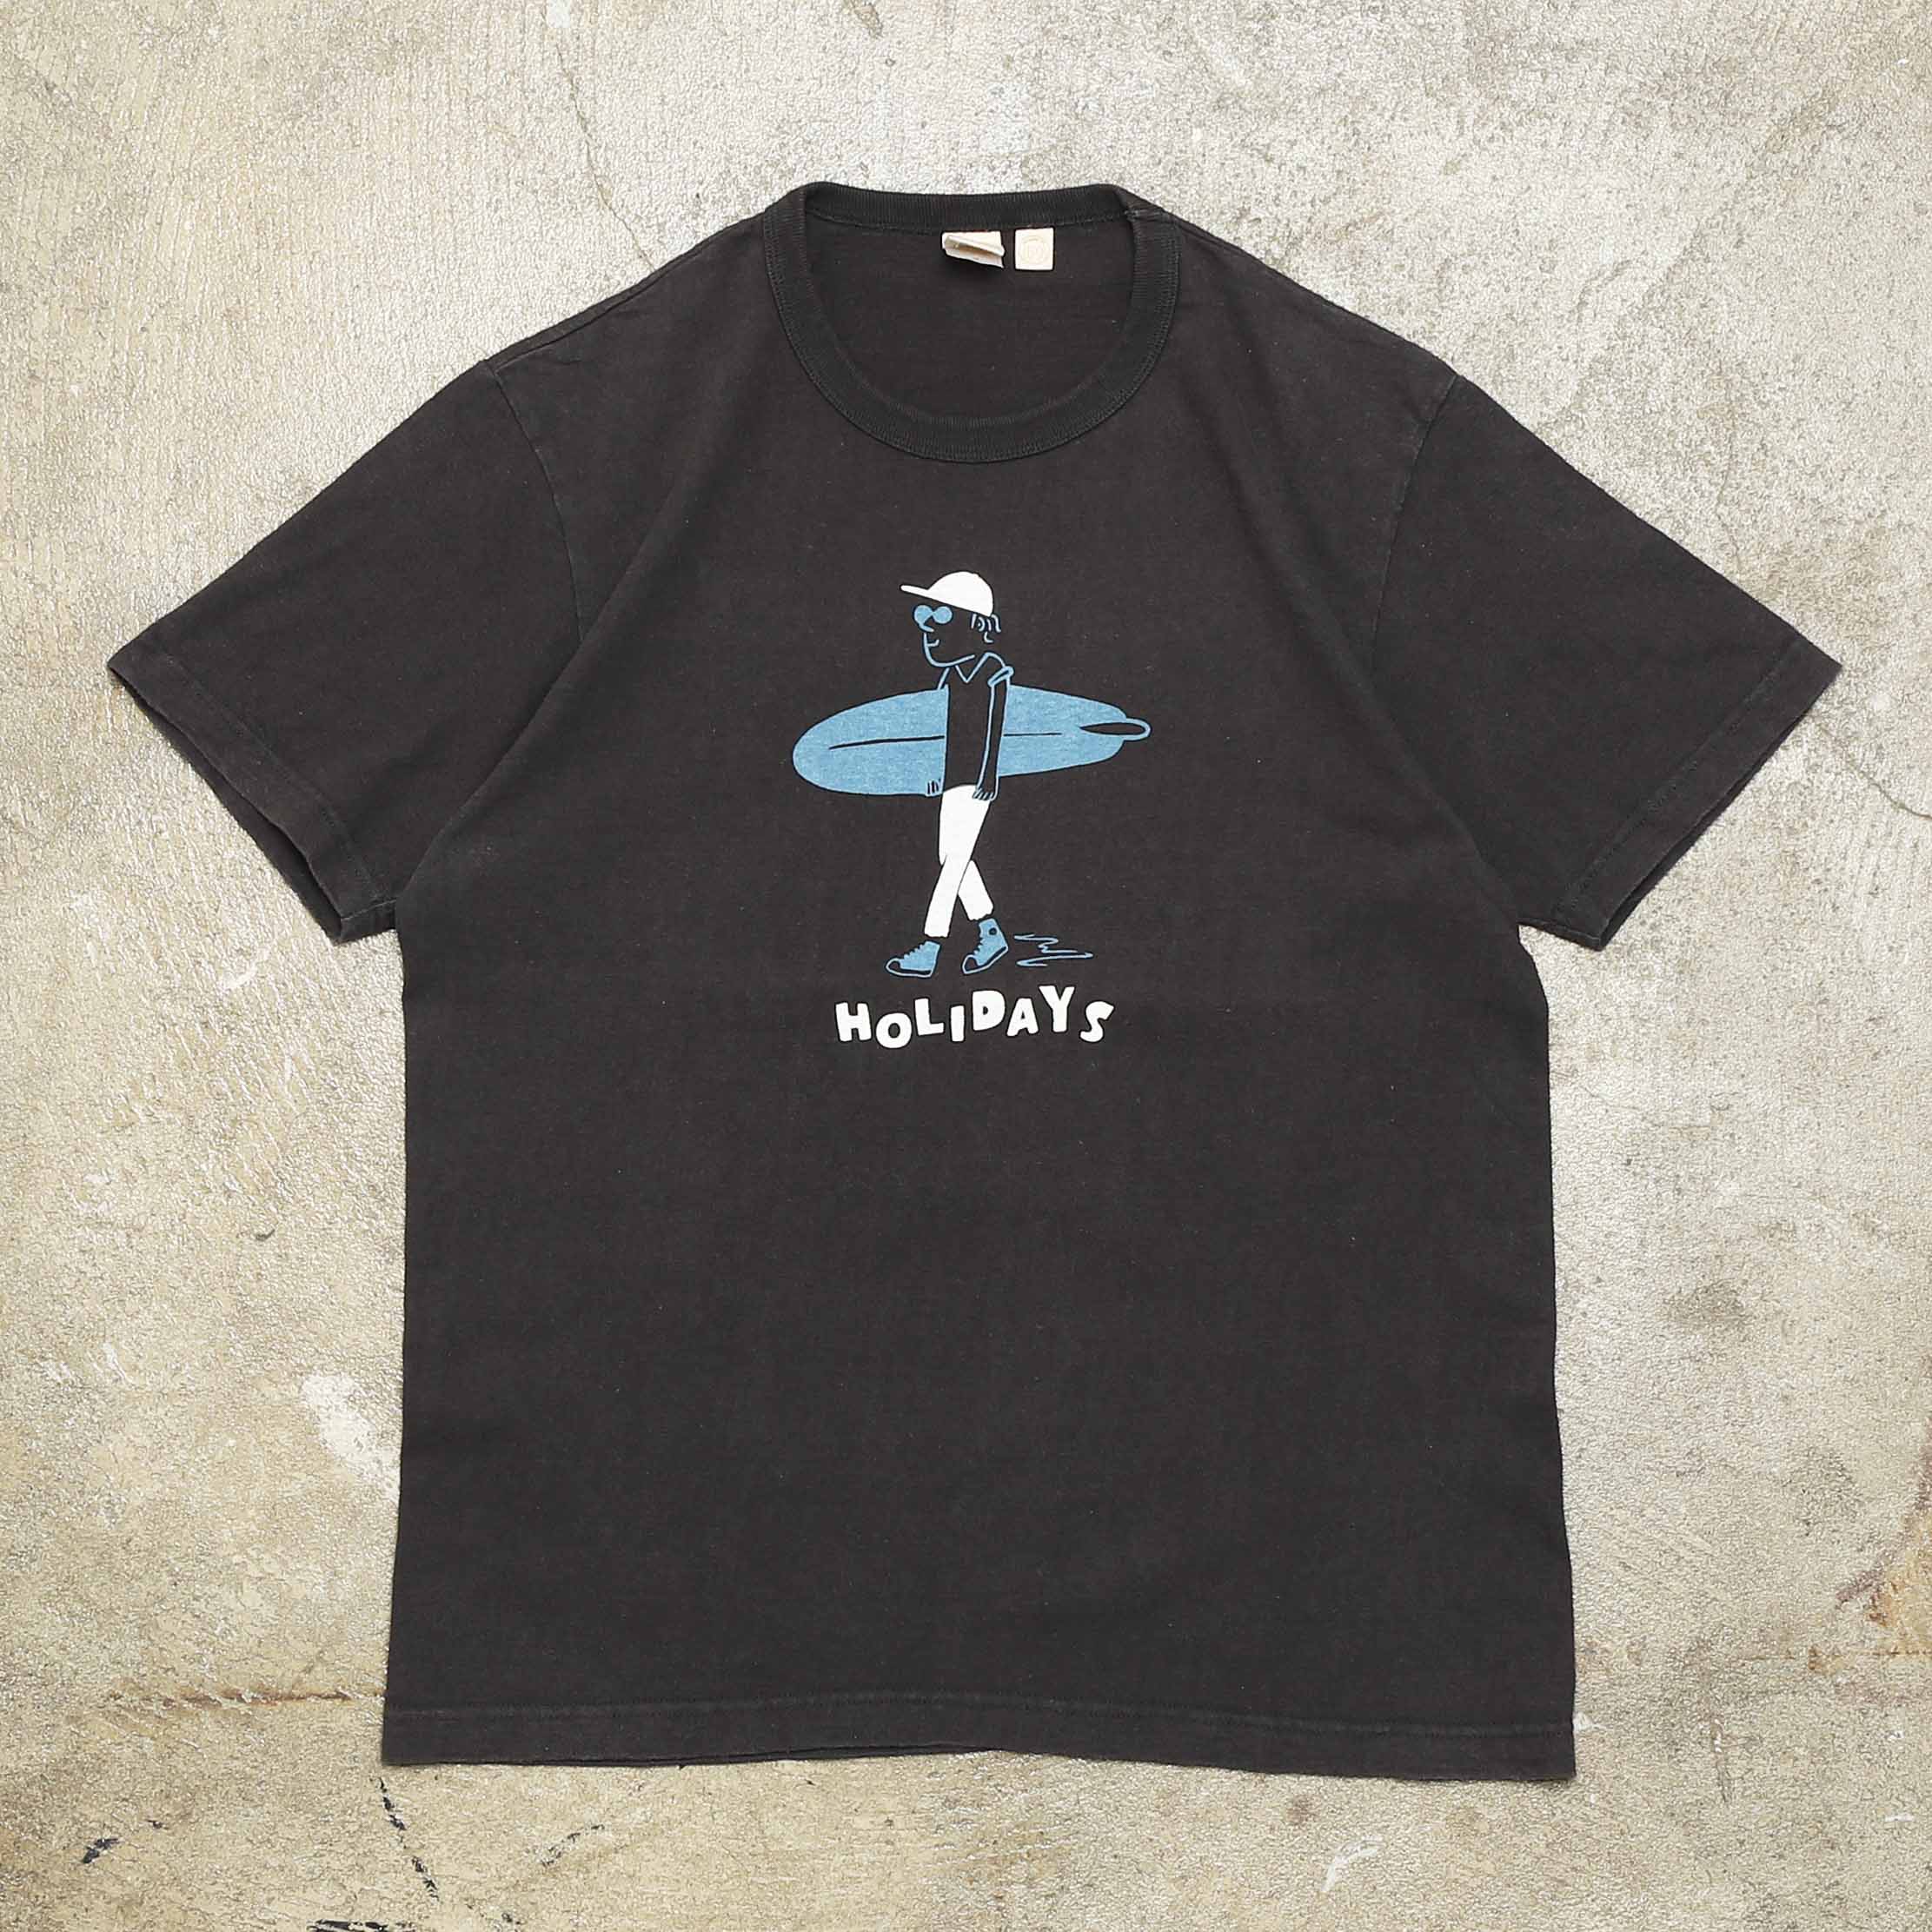 BARNS OUTFITTERS S/S TEE - HOLIDAYS BLACK